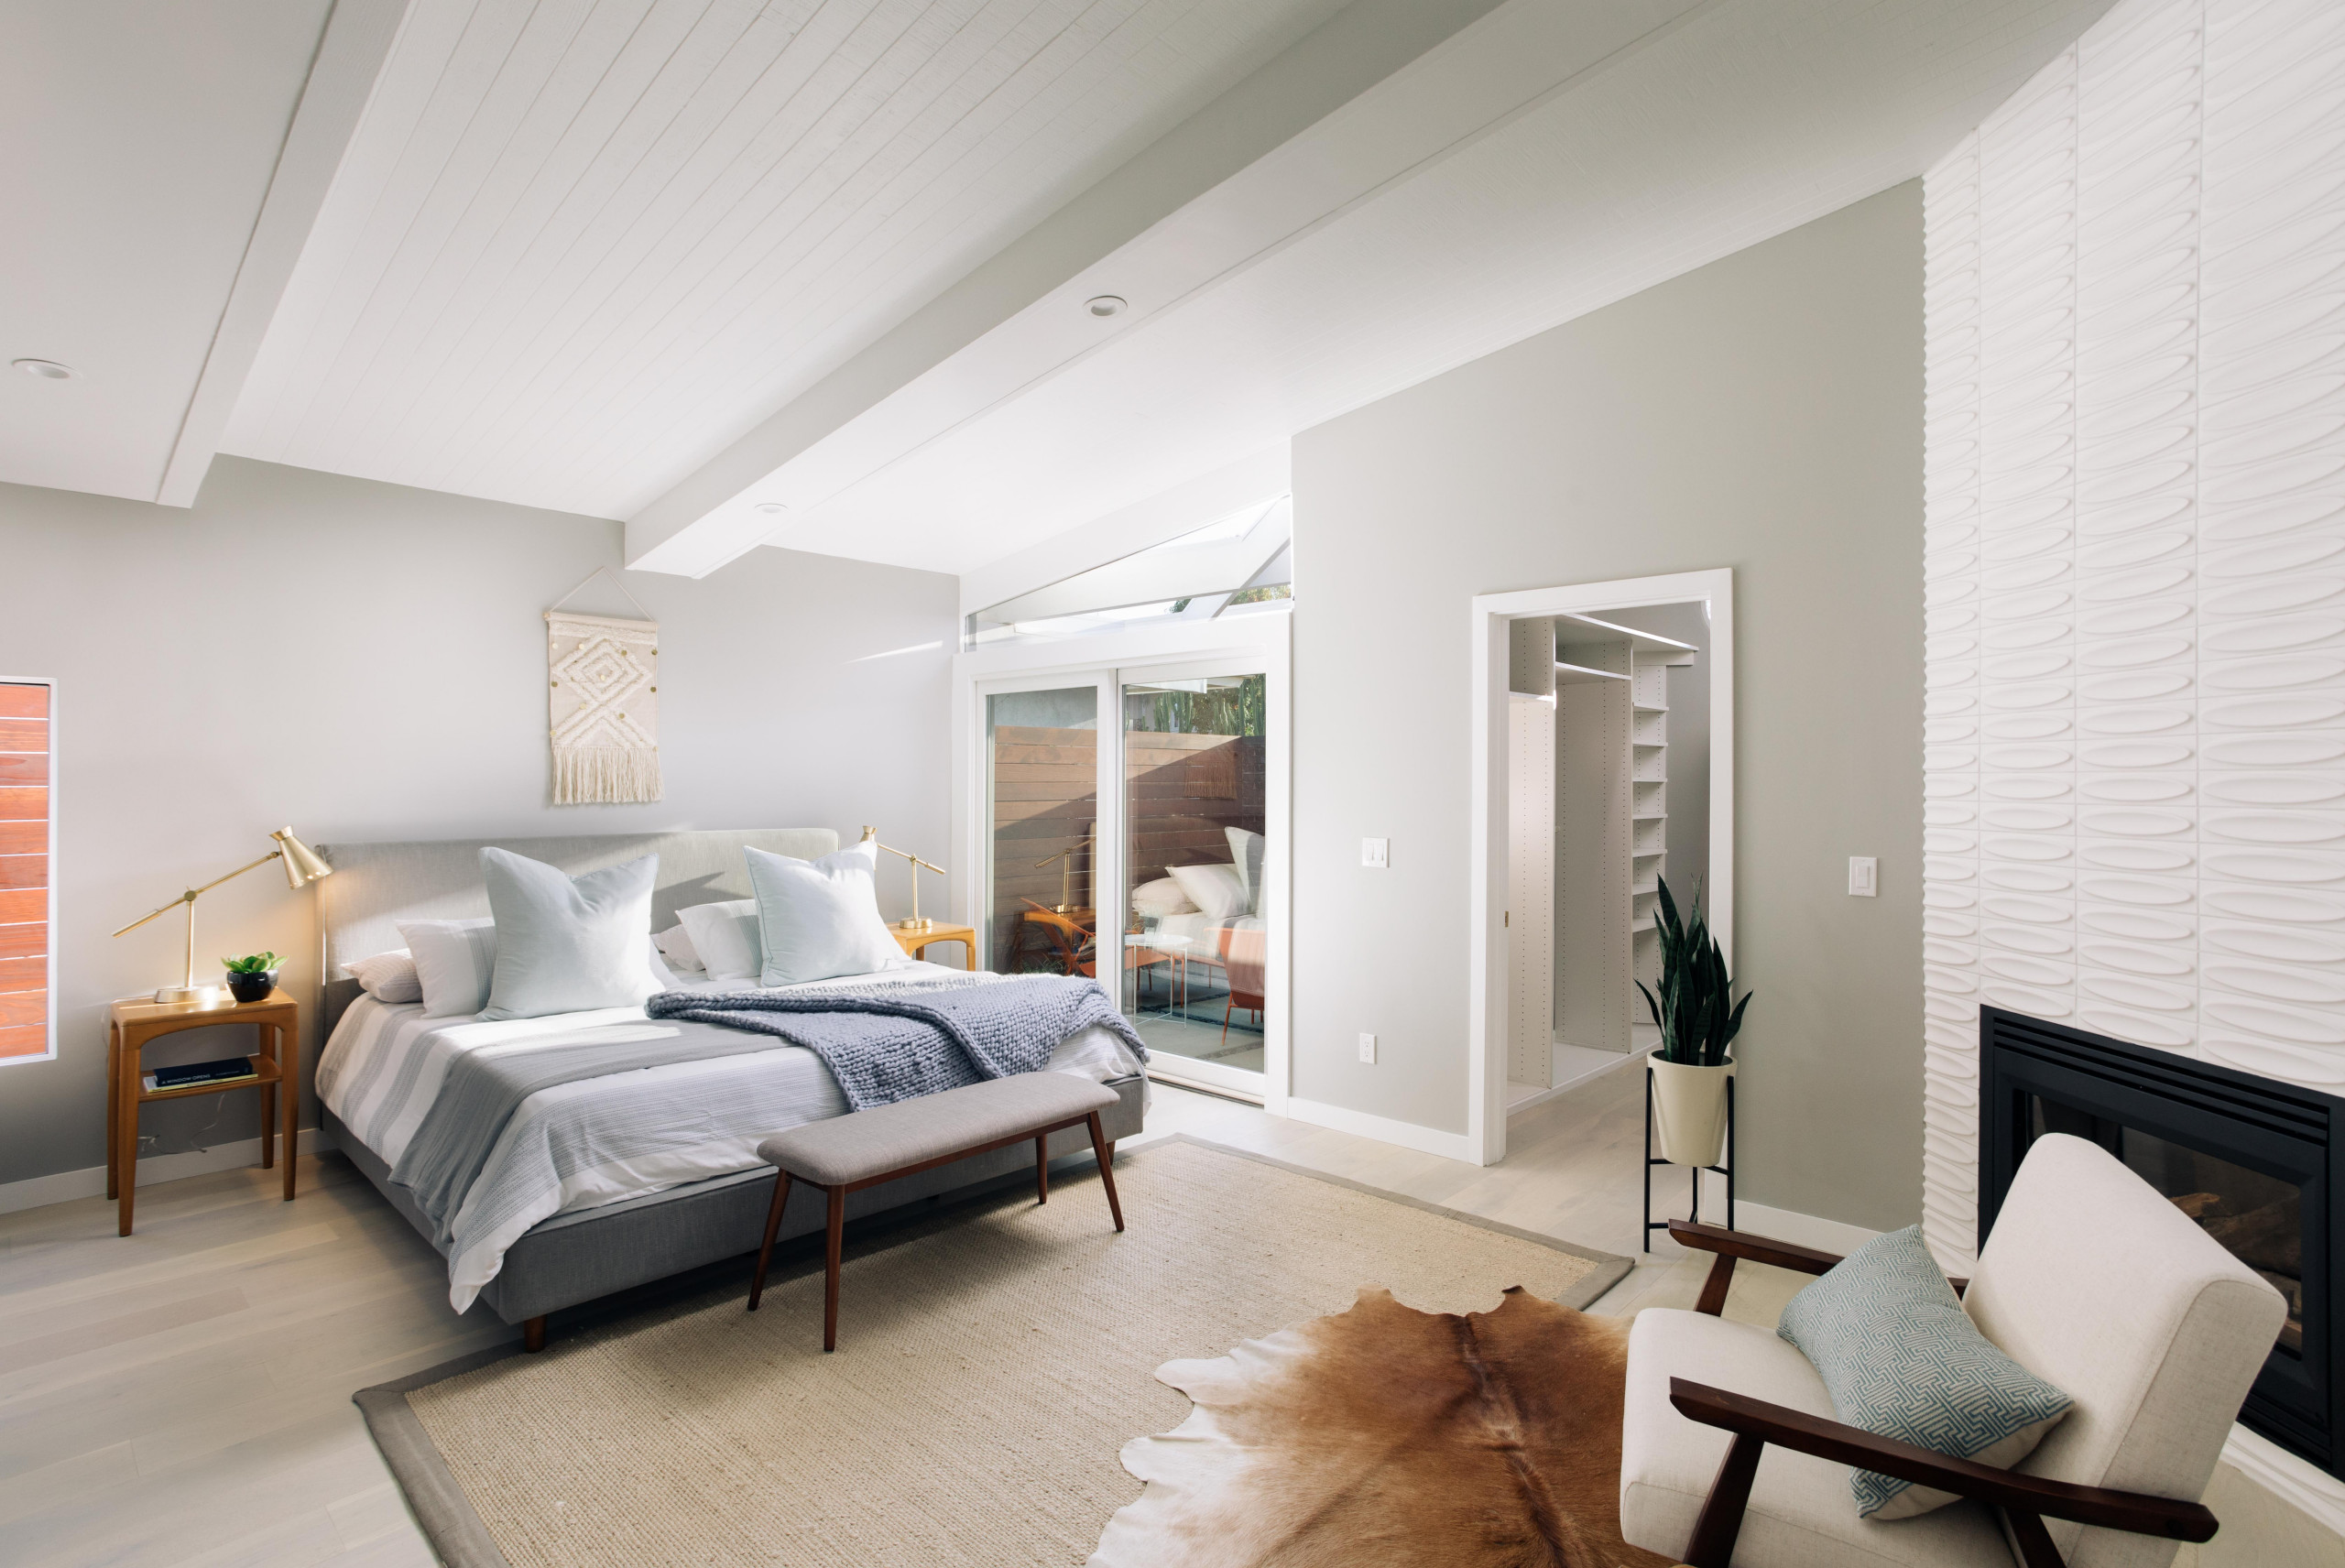 18 Marvelous Mid-Century Modern Bedroom Interiors You Will Adore